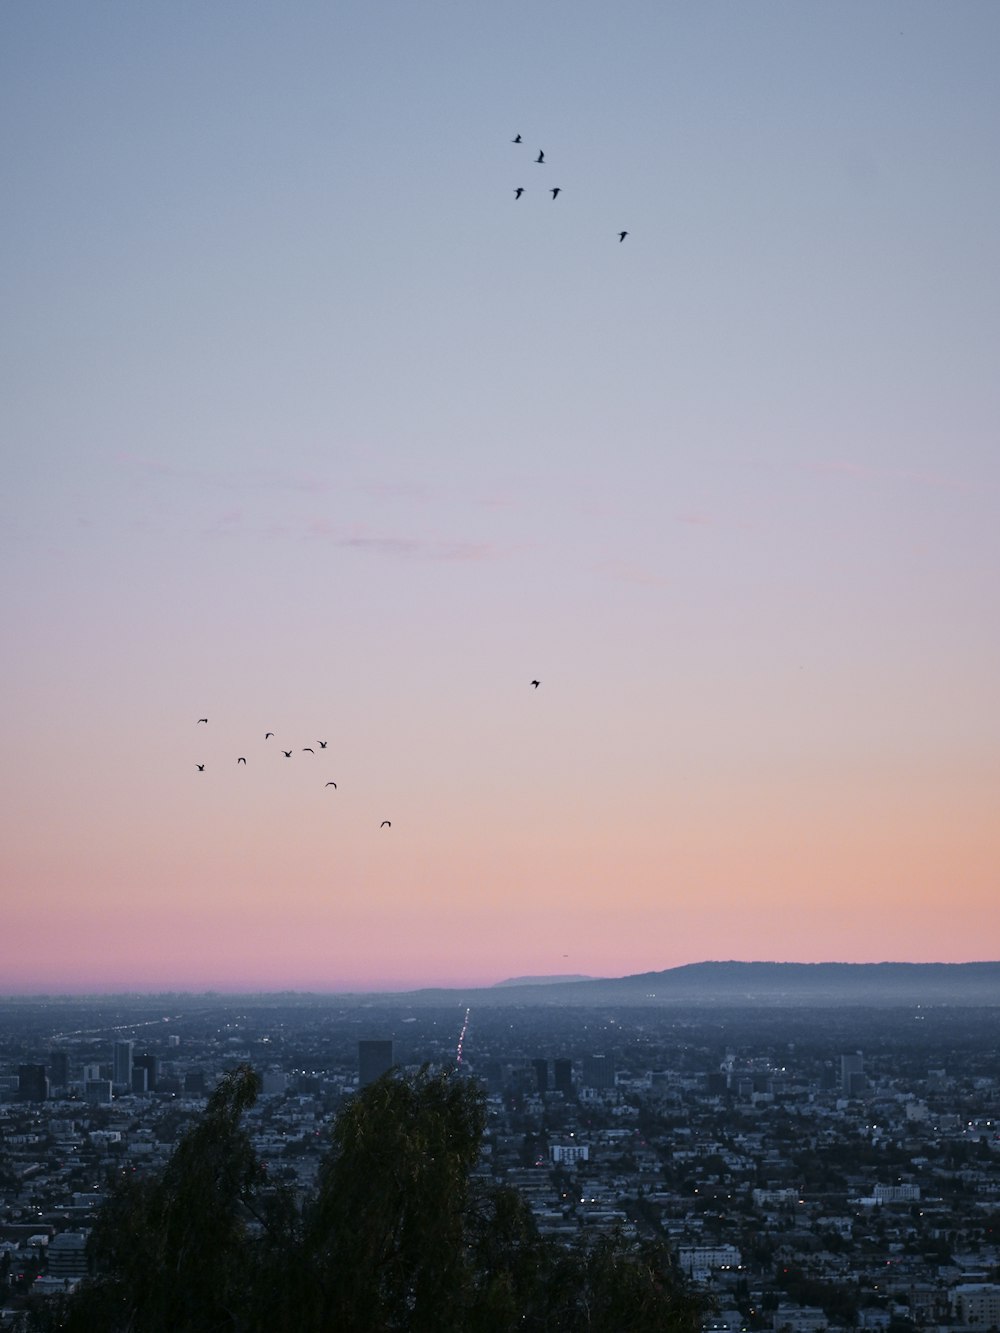 a flock of birds flying over a city at sunset